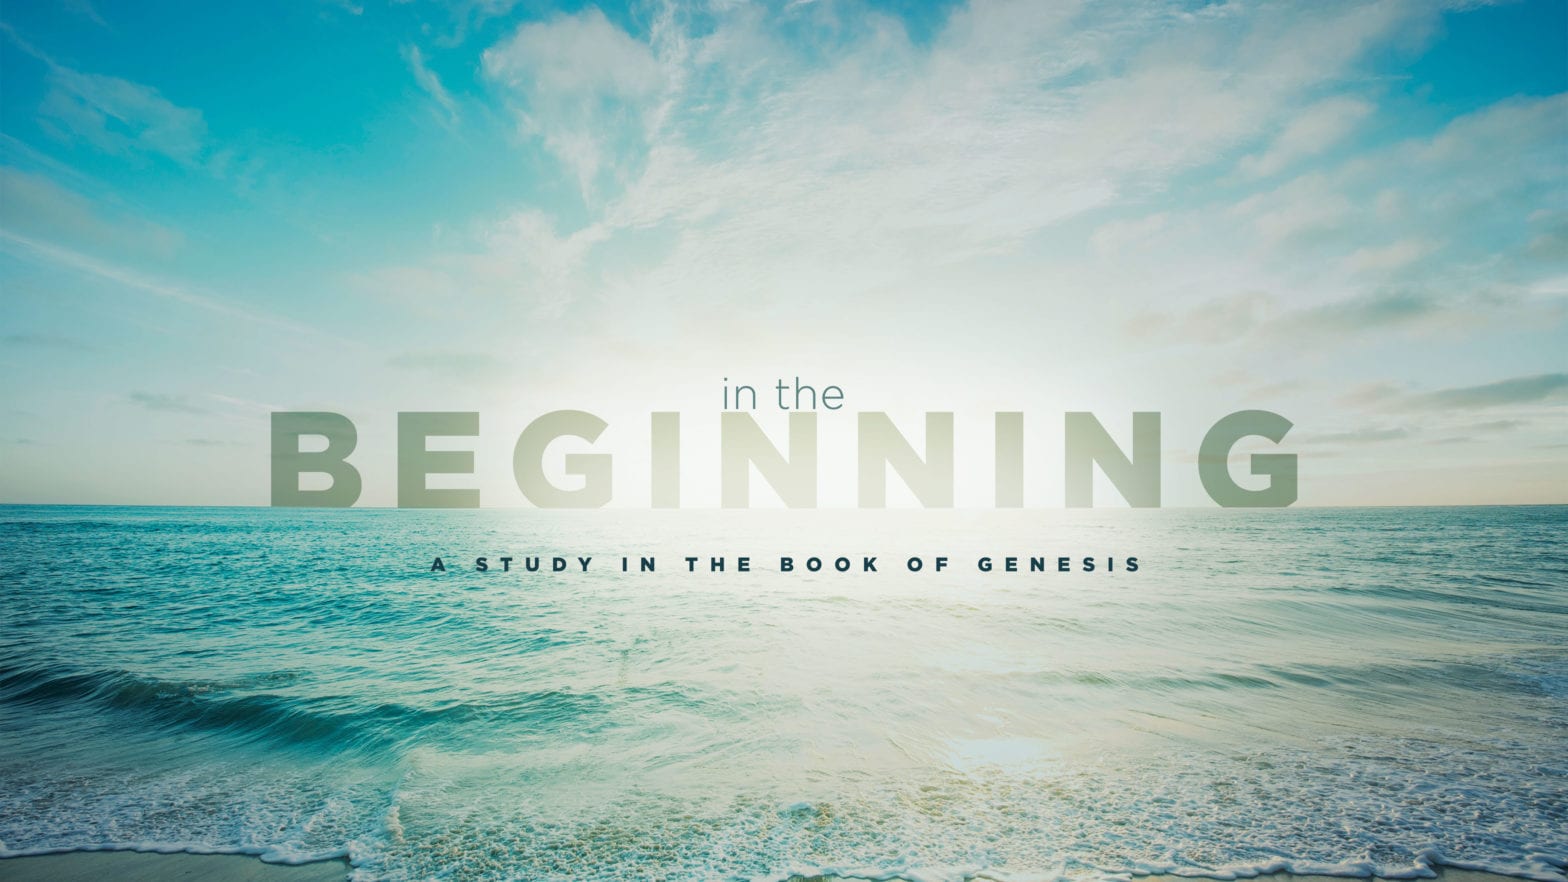 my take on the “In The Beginning” series